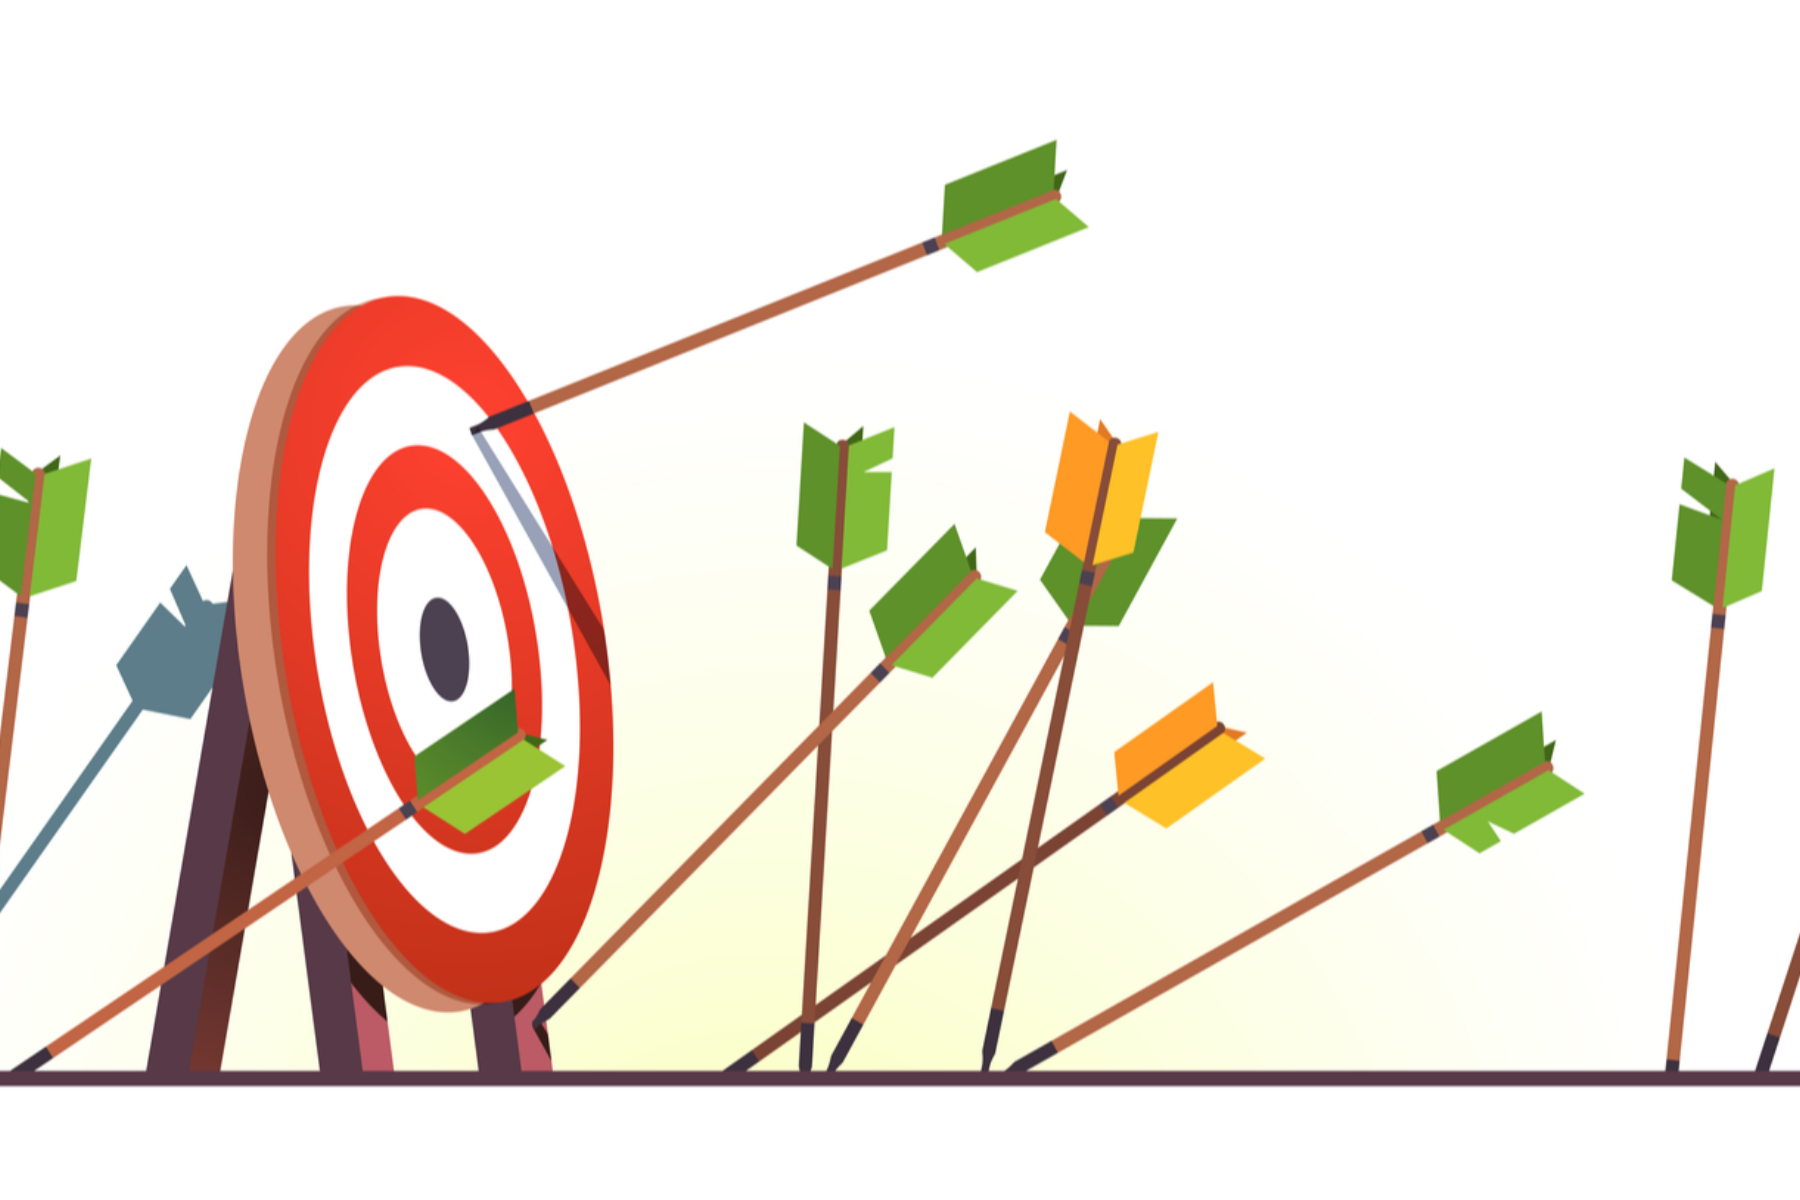 Archery target containing arrows